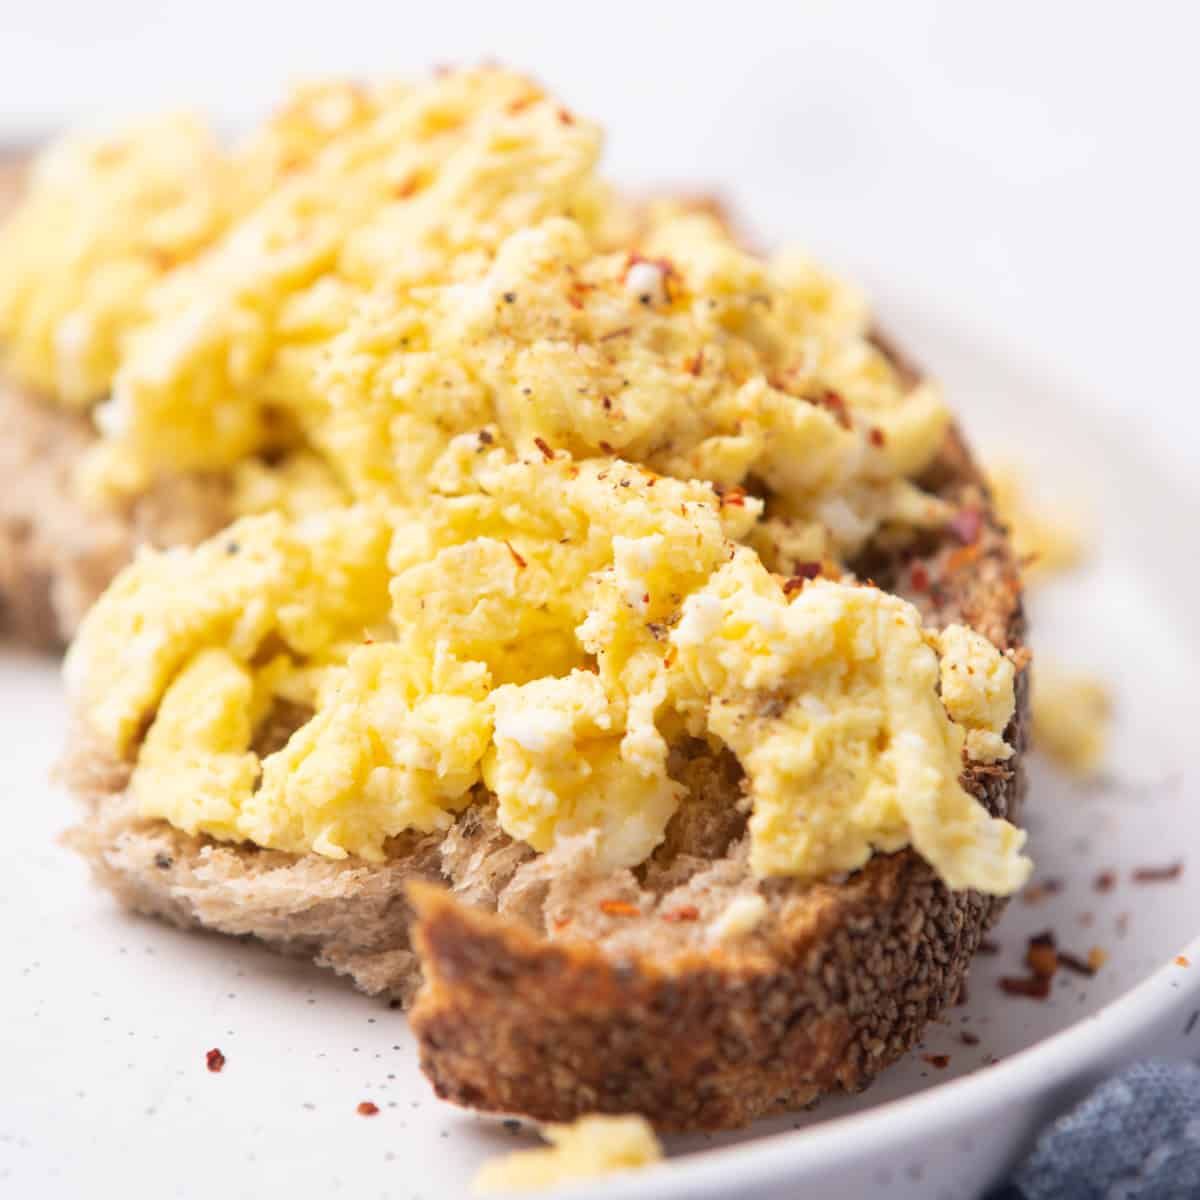 Scrambled Eggs in the Microwave